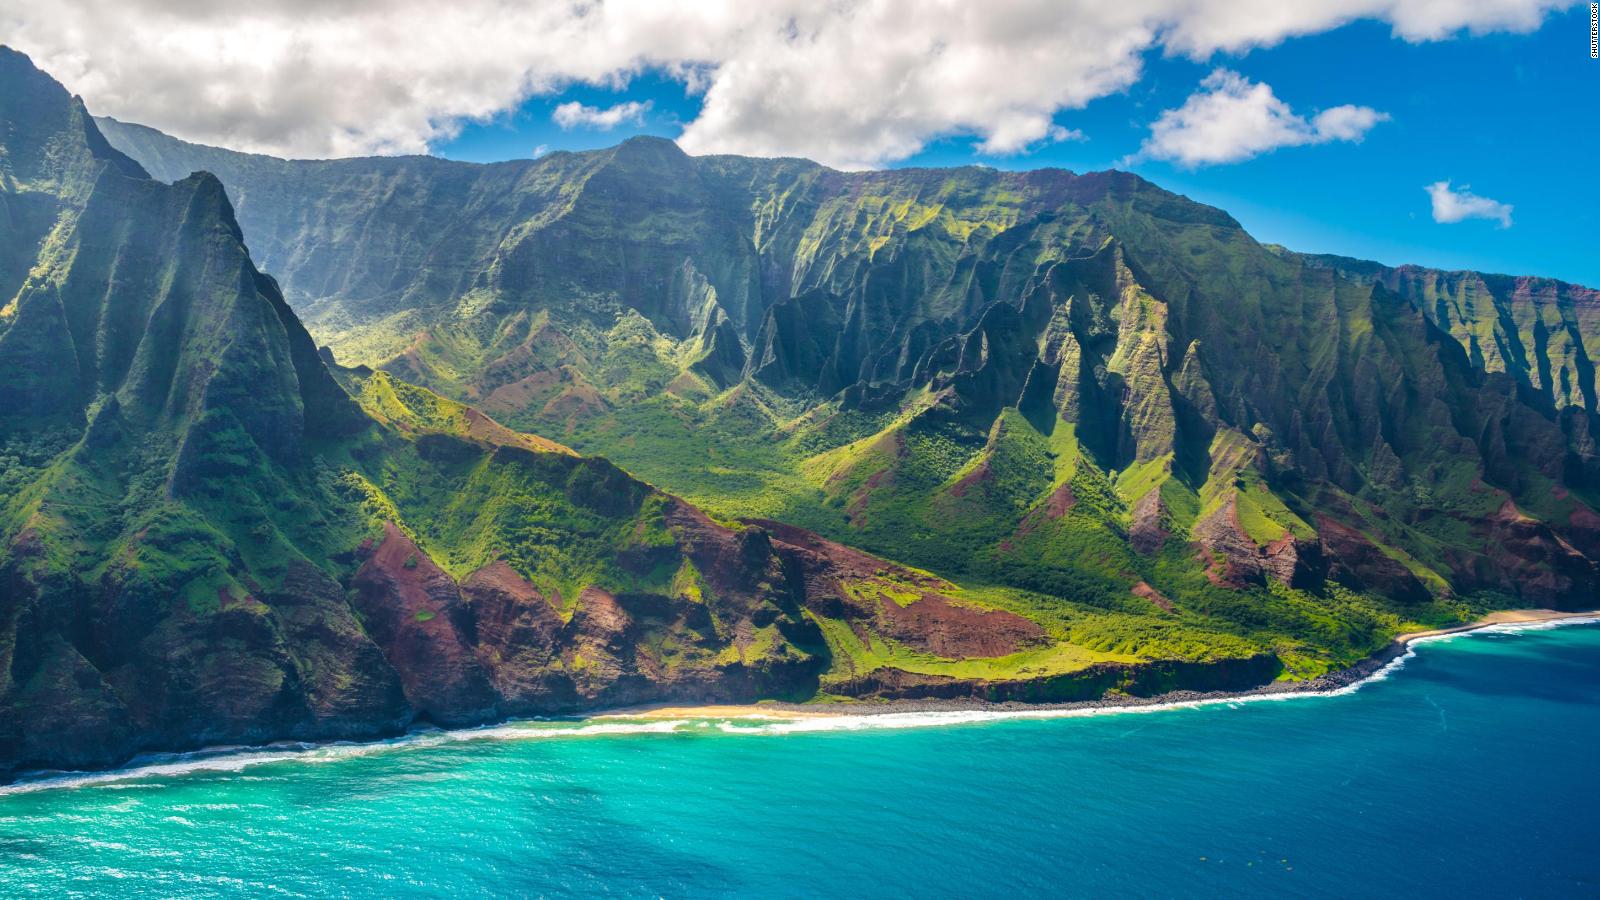 Is your next trip to Hawaii? Here’s what you need to know!